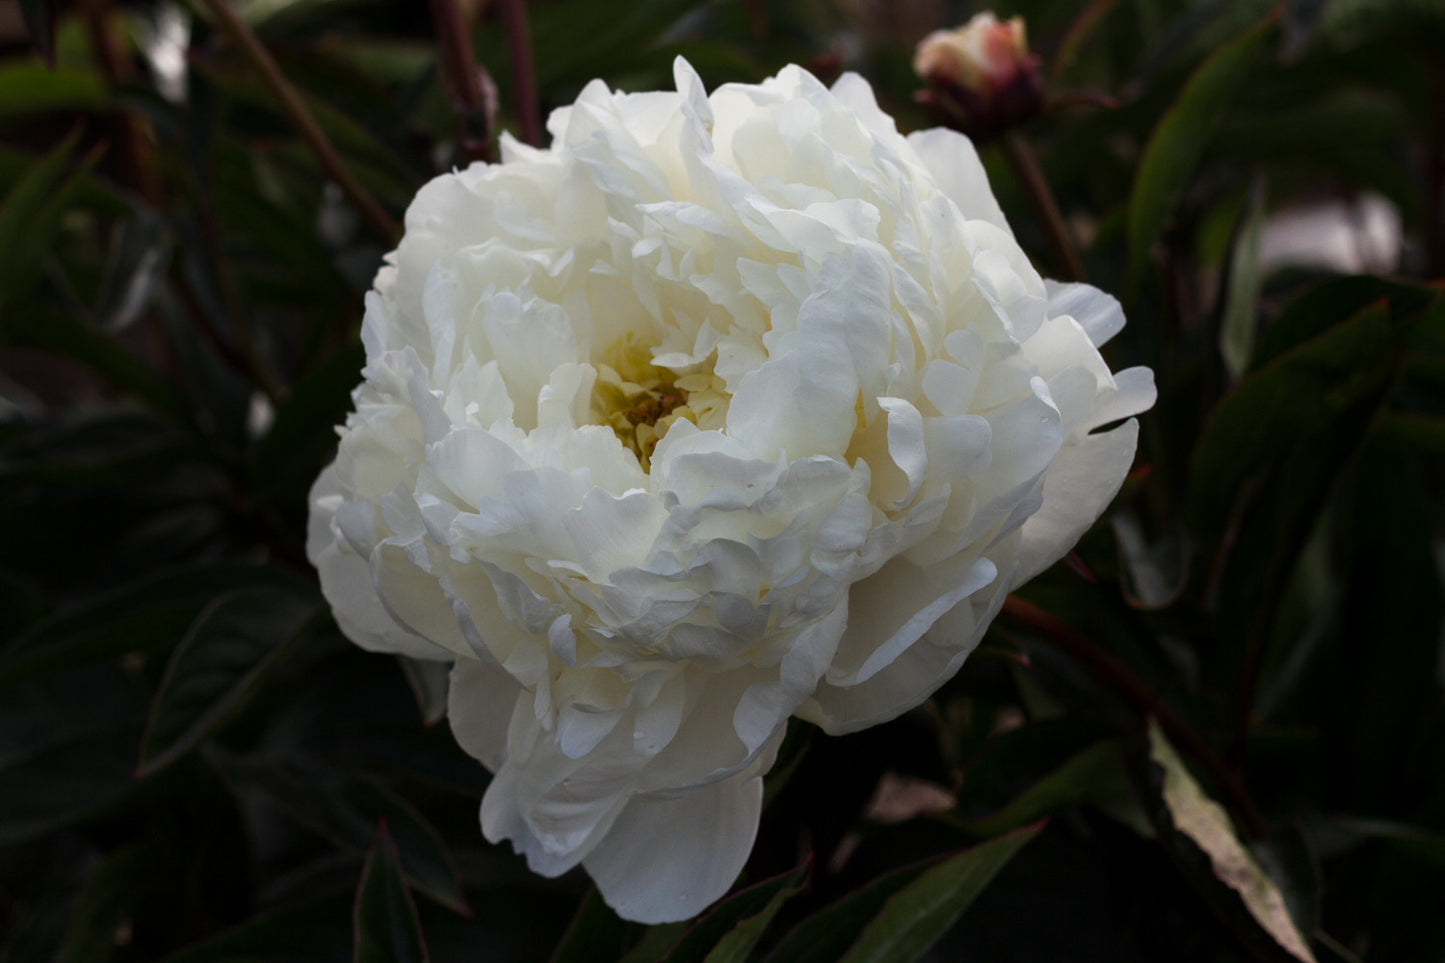 Duchesse de Nemours full fluffy double white fragrant peony roots and plants at Brooks Gardens Peonies 